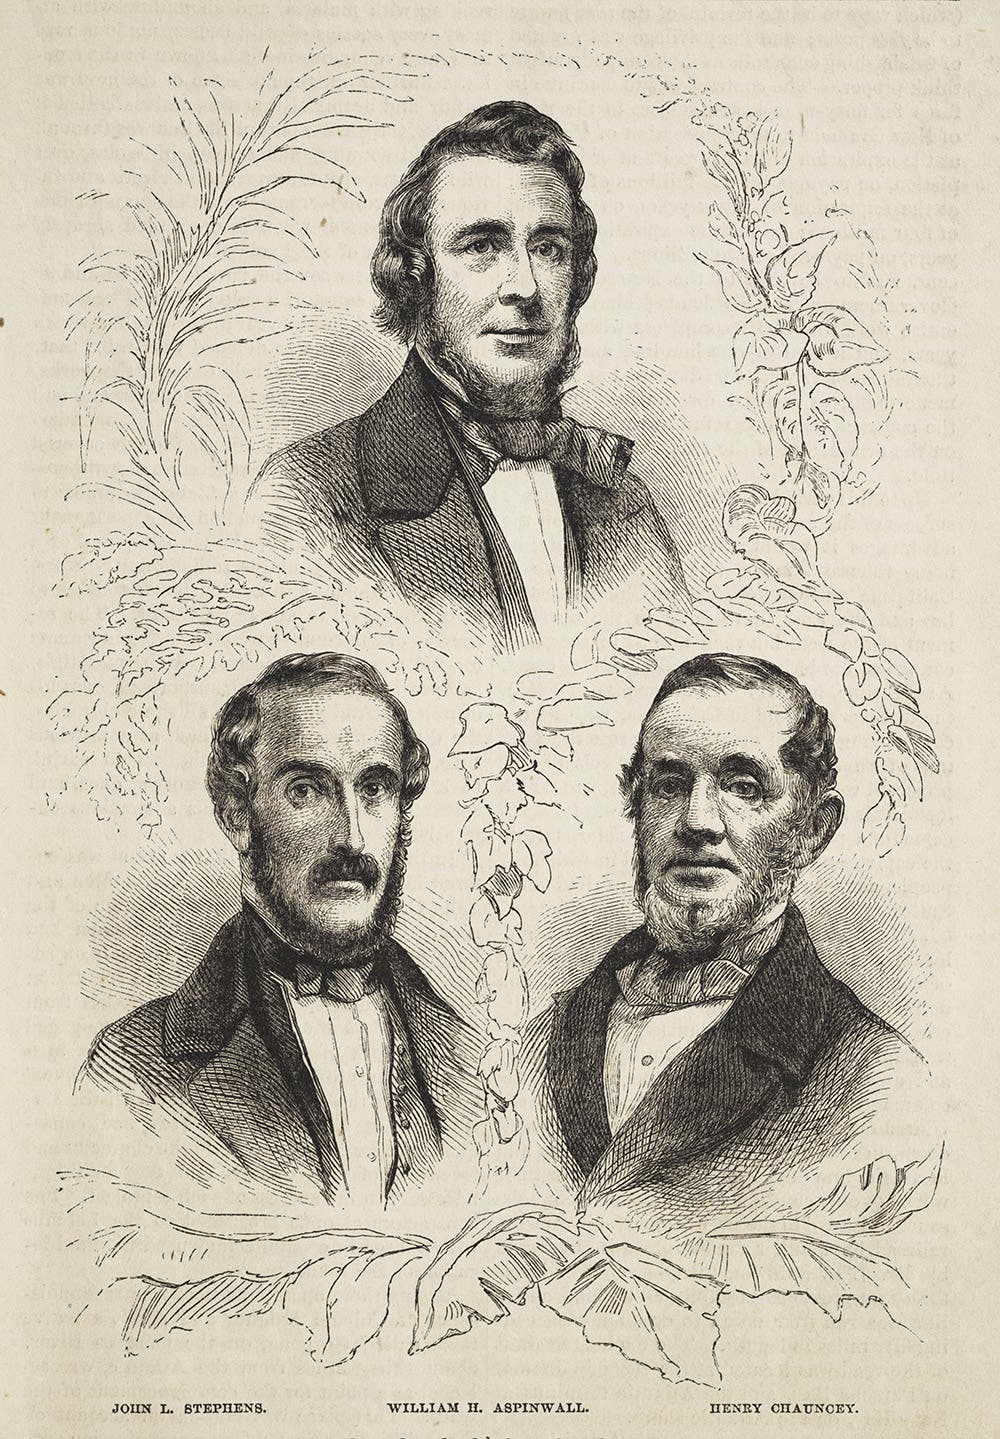 Founders of the Panama Railroad, John L. Stephens, William H. Aspinwall, and Henry Chauncey. From Harper’s New Monthly Magazine, vol. 18, no. 103, January 1859.